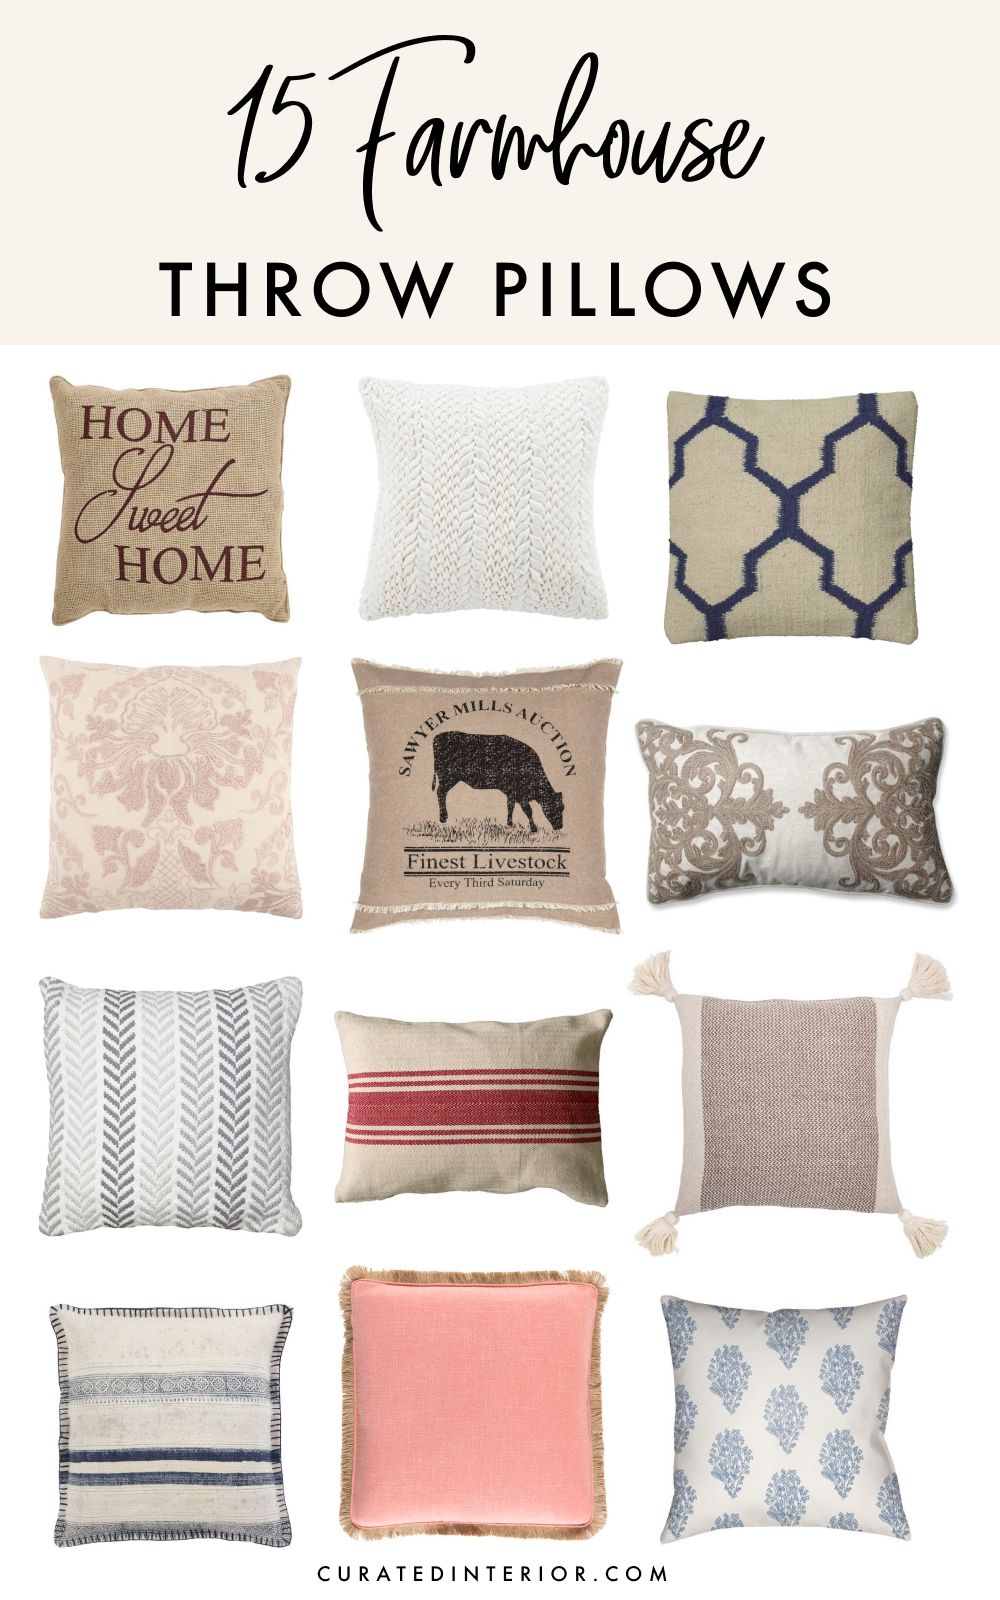 15 Farmhouse Throw Pillows for the Couch, Bed and Home